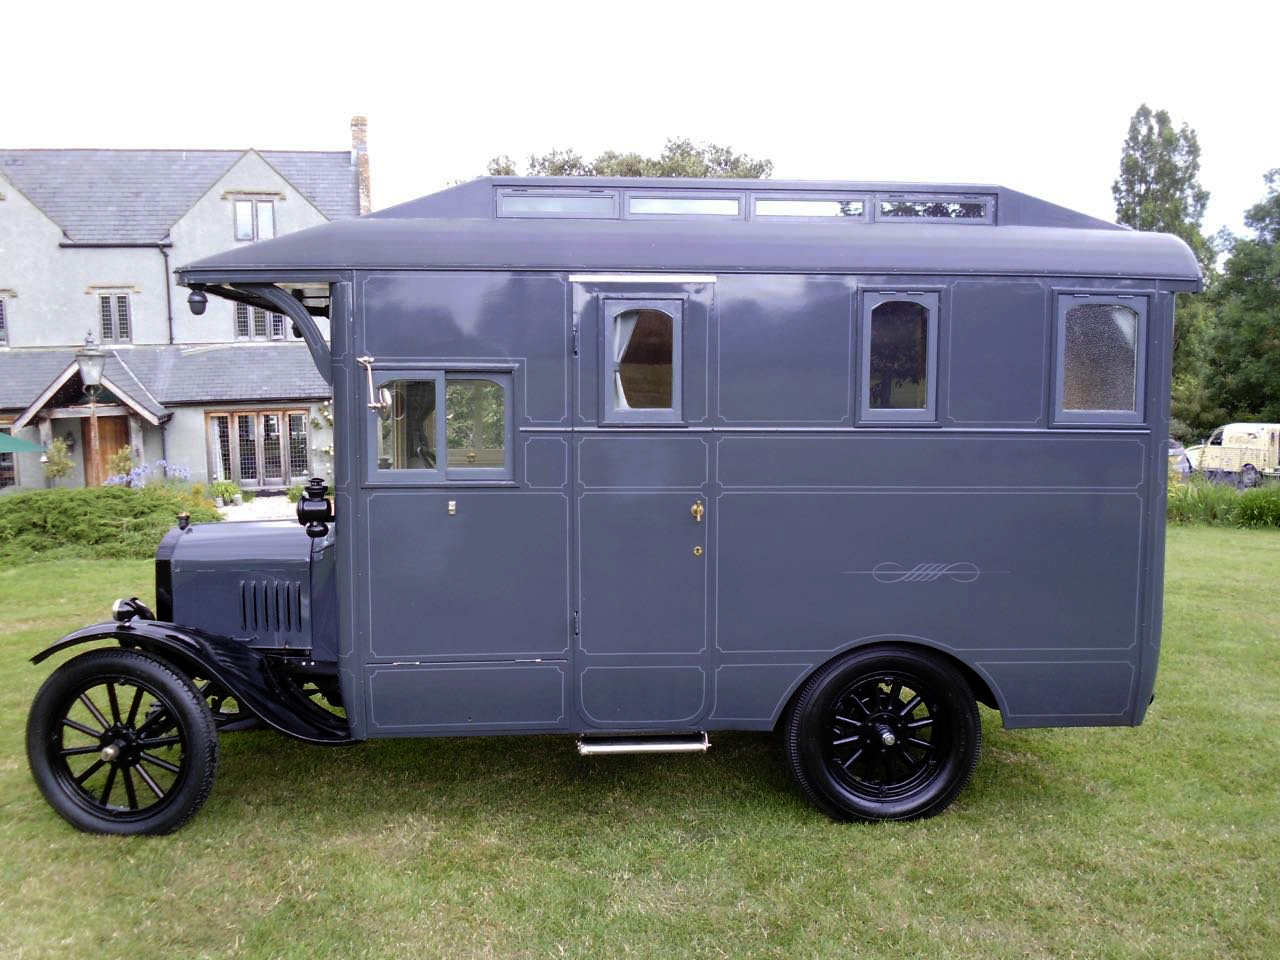 Introduction to the 1922 Ford Model T Camper Van